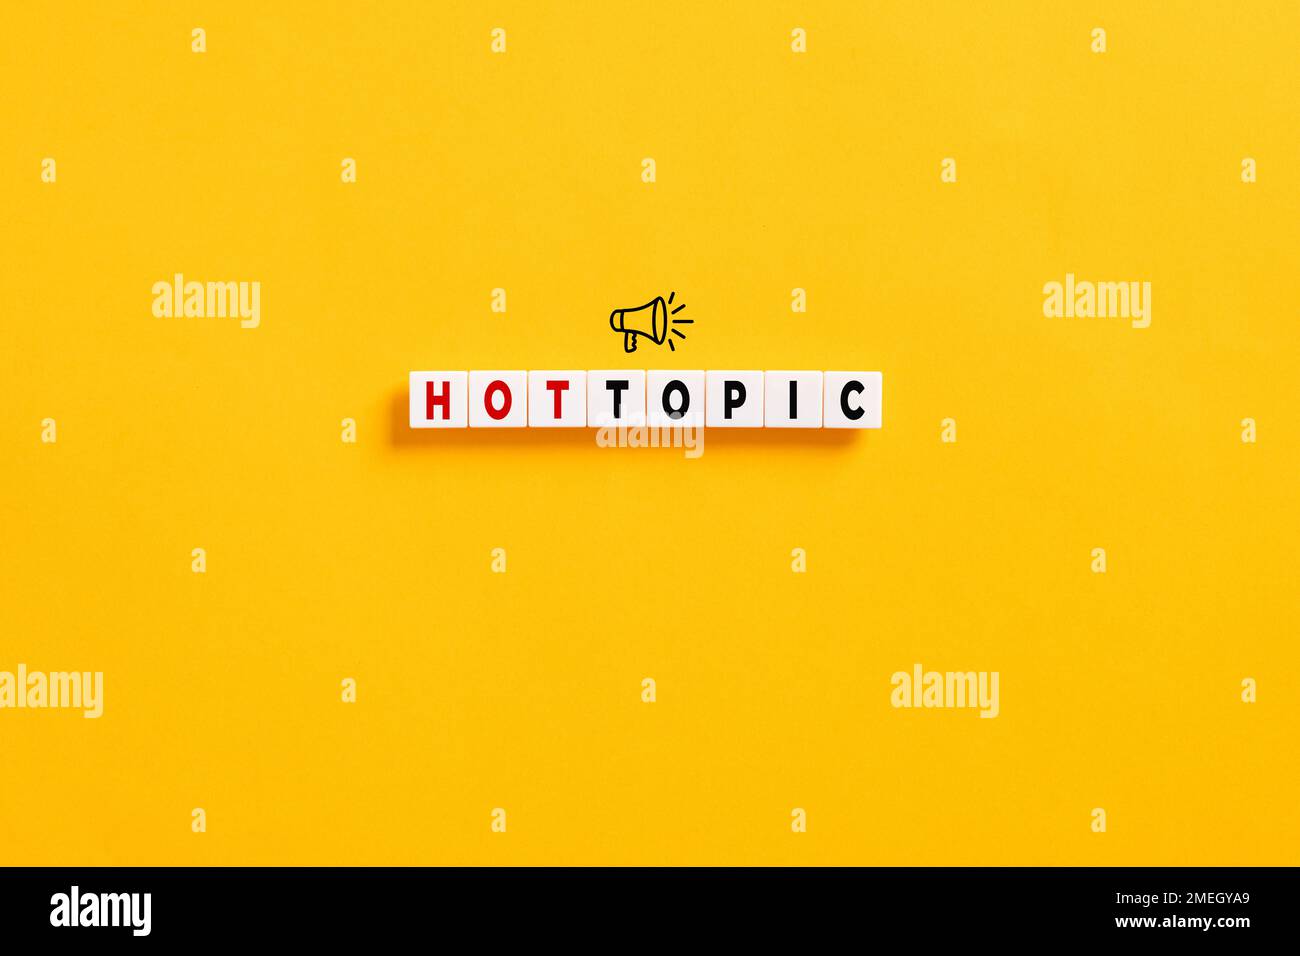 White letter blocks on yellow background with the word hot topic and a megaphone symbol. Popular topics and latest discussion trends. Stock Photo